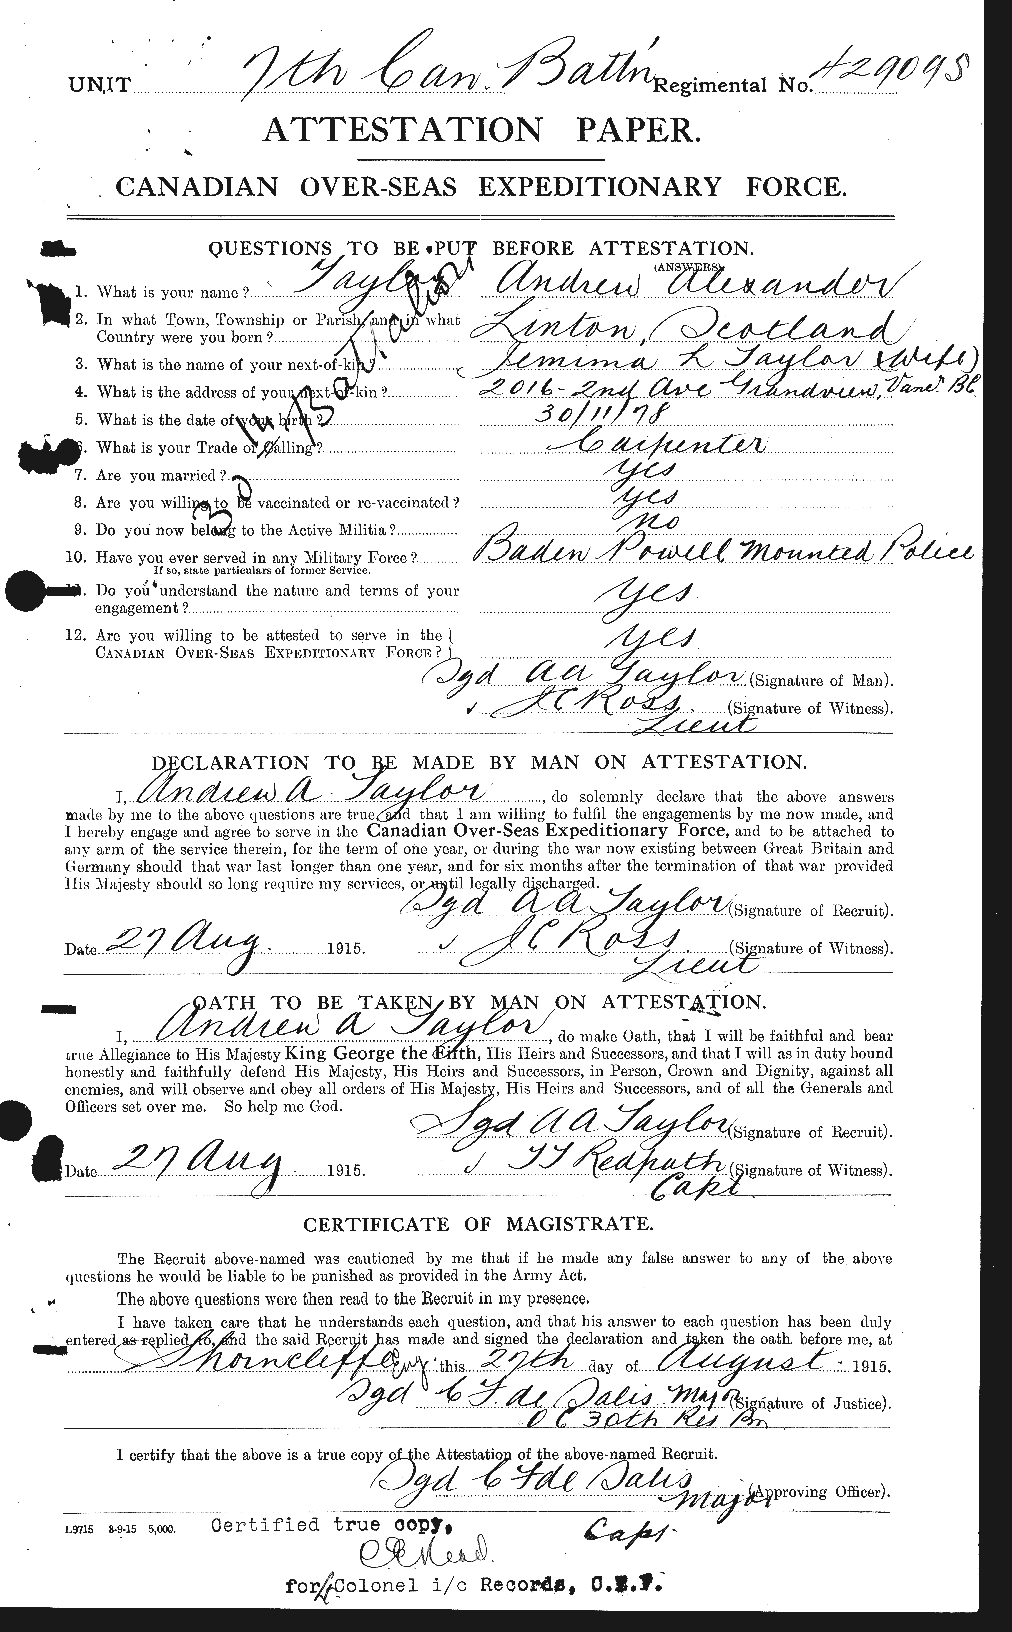 Personnel Records of the First World War - CEF 626225a